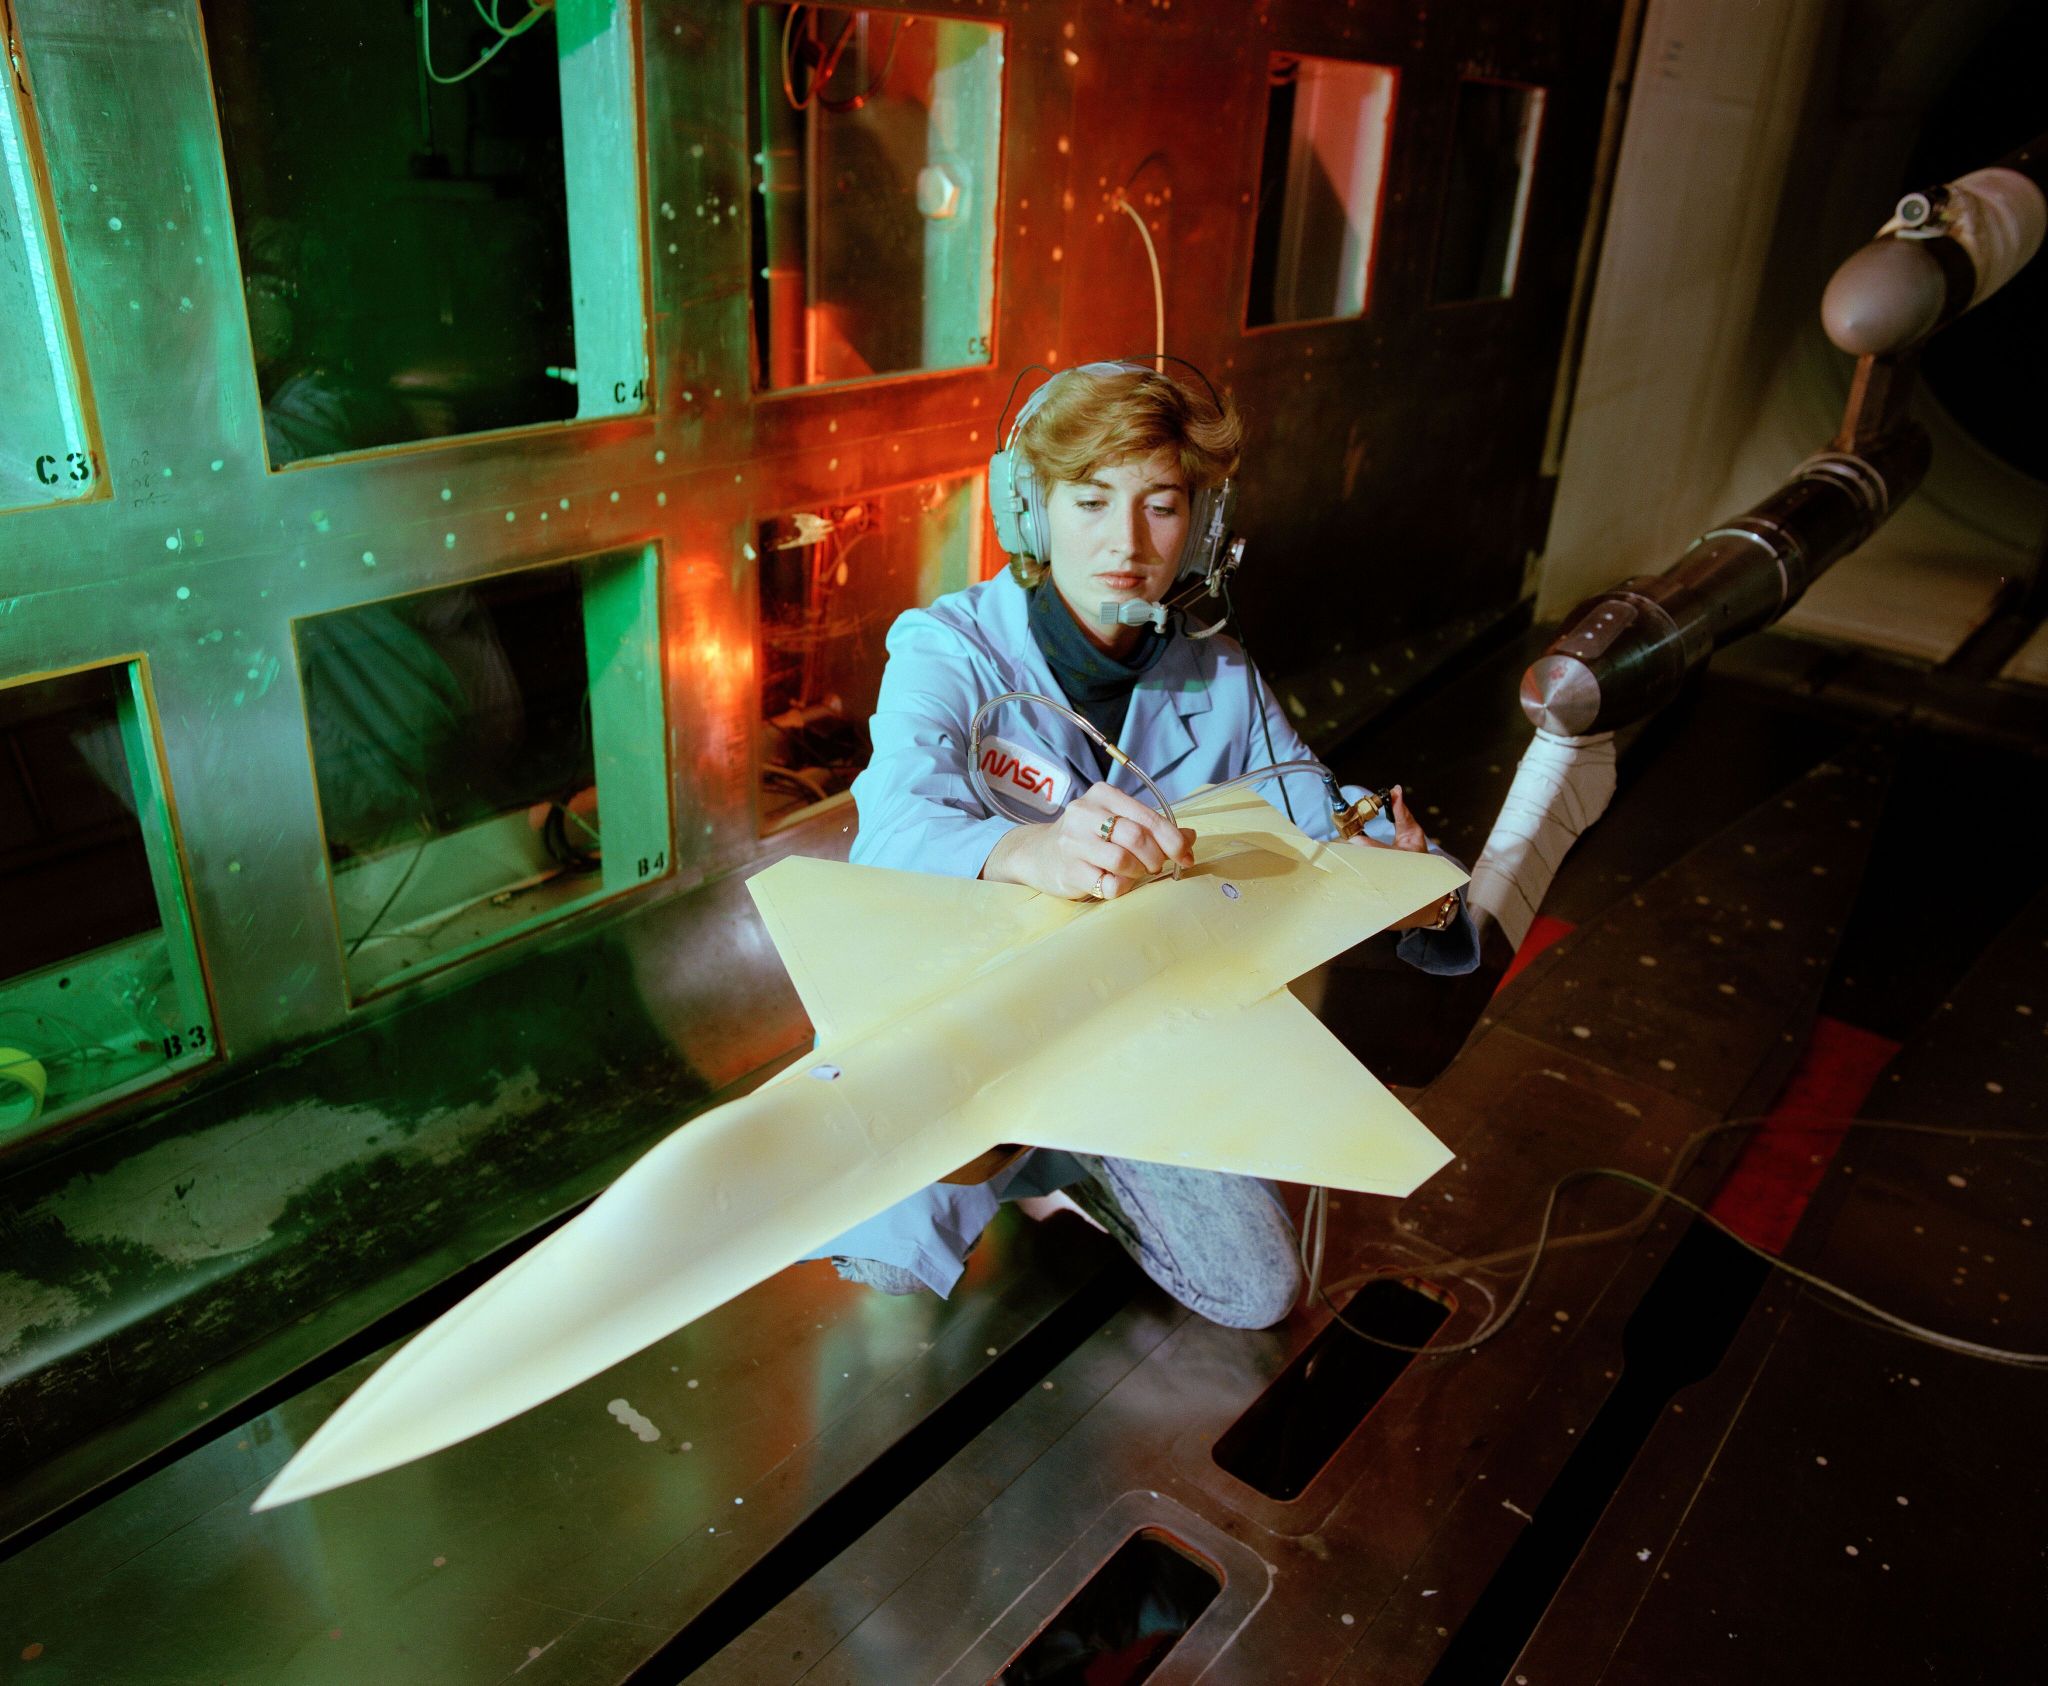 NASA technician Jody Chandler prepares an aircraft model, provided by McDonnell-Douglas Aerospace, for high-speed wind tunnel testing in the 8-Foot Transonic Pressure Tunnel.